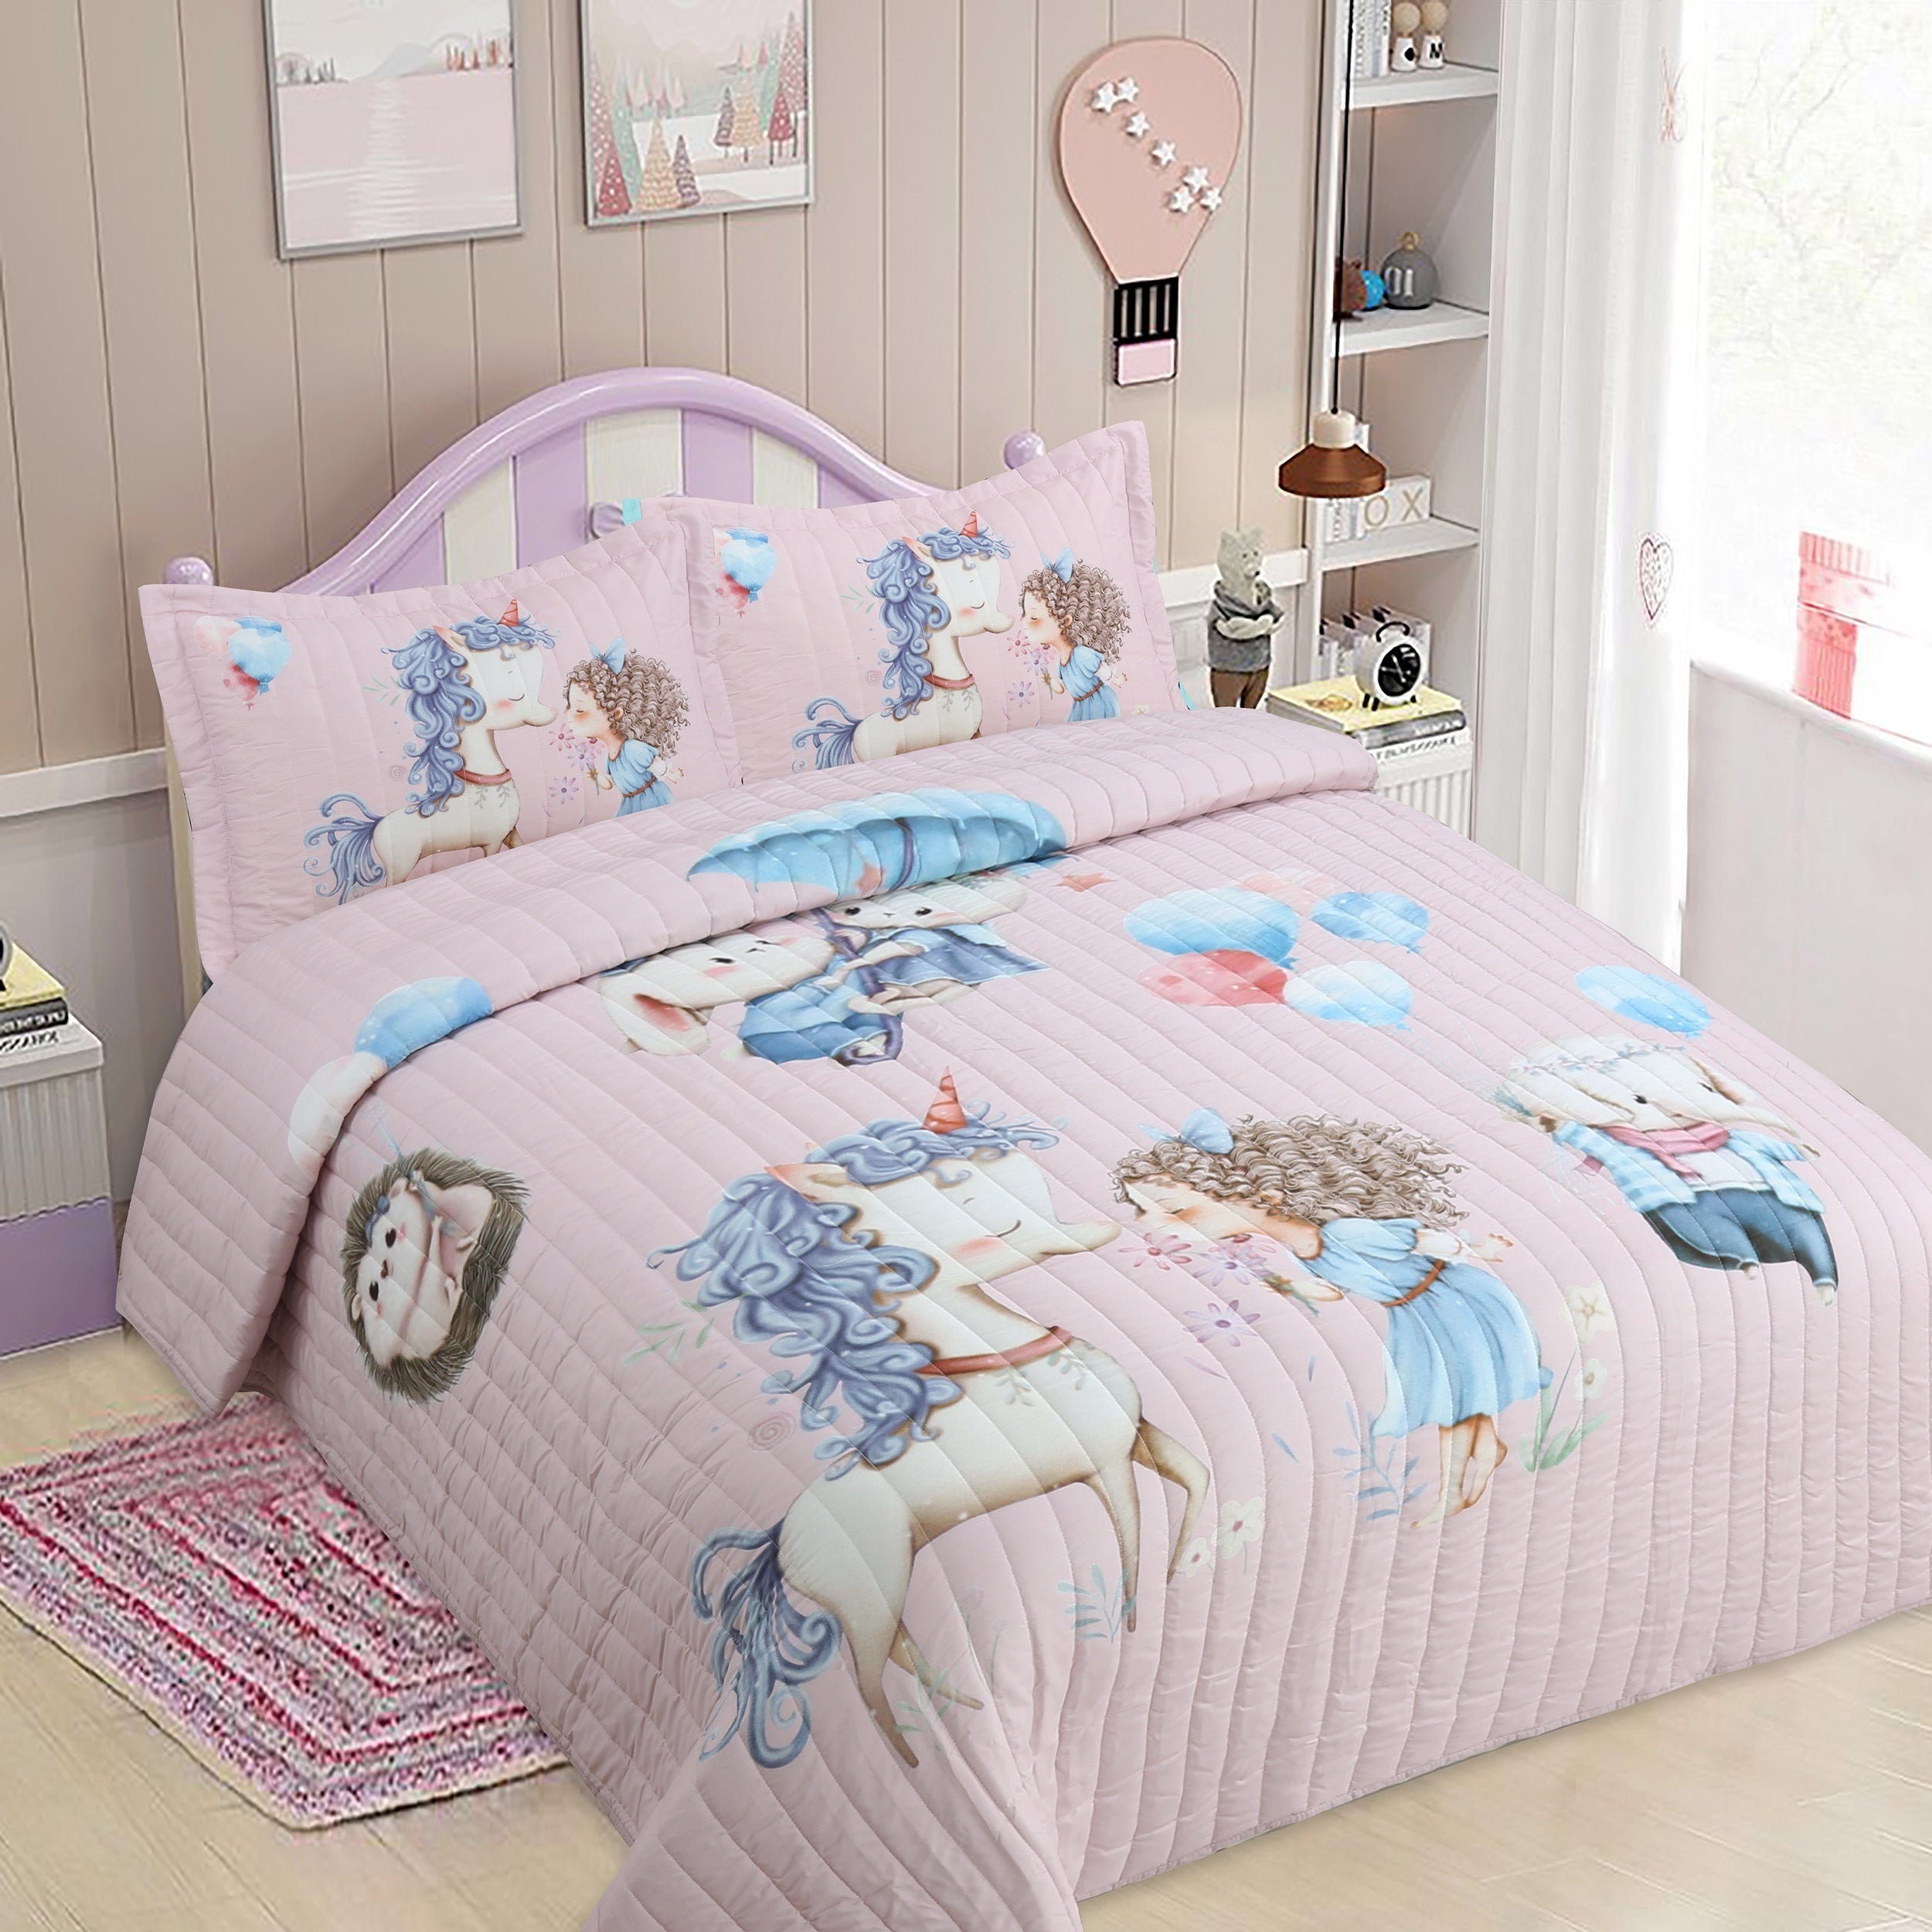 3pcs Soft and Comfortable Unicorn Quilt Set for Kids - Perfect for All Seasons - Machine Washable - Includes 1 Quilt and 2 Pillowcases (Core Not Included)